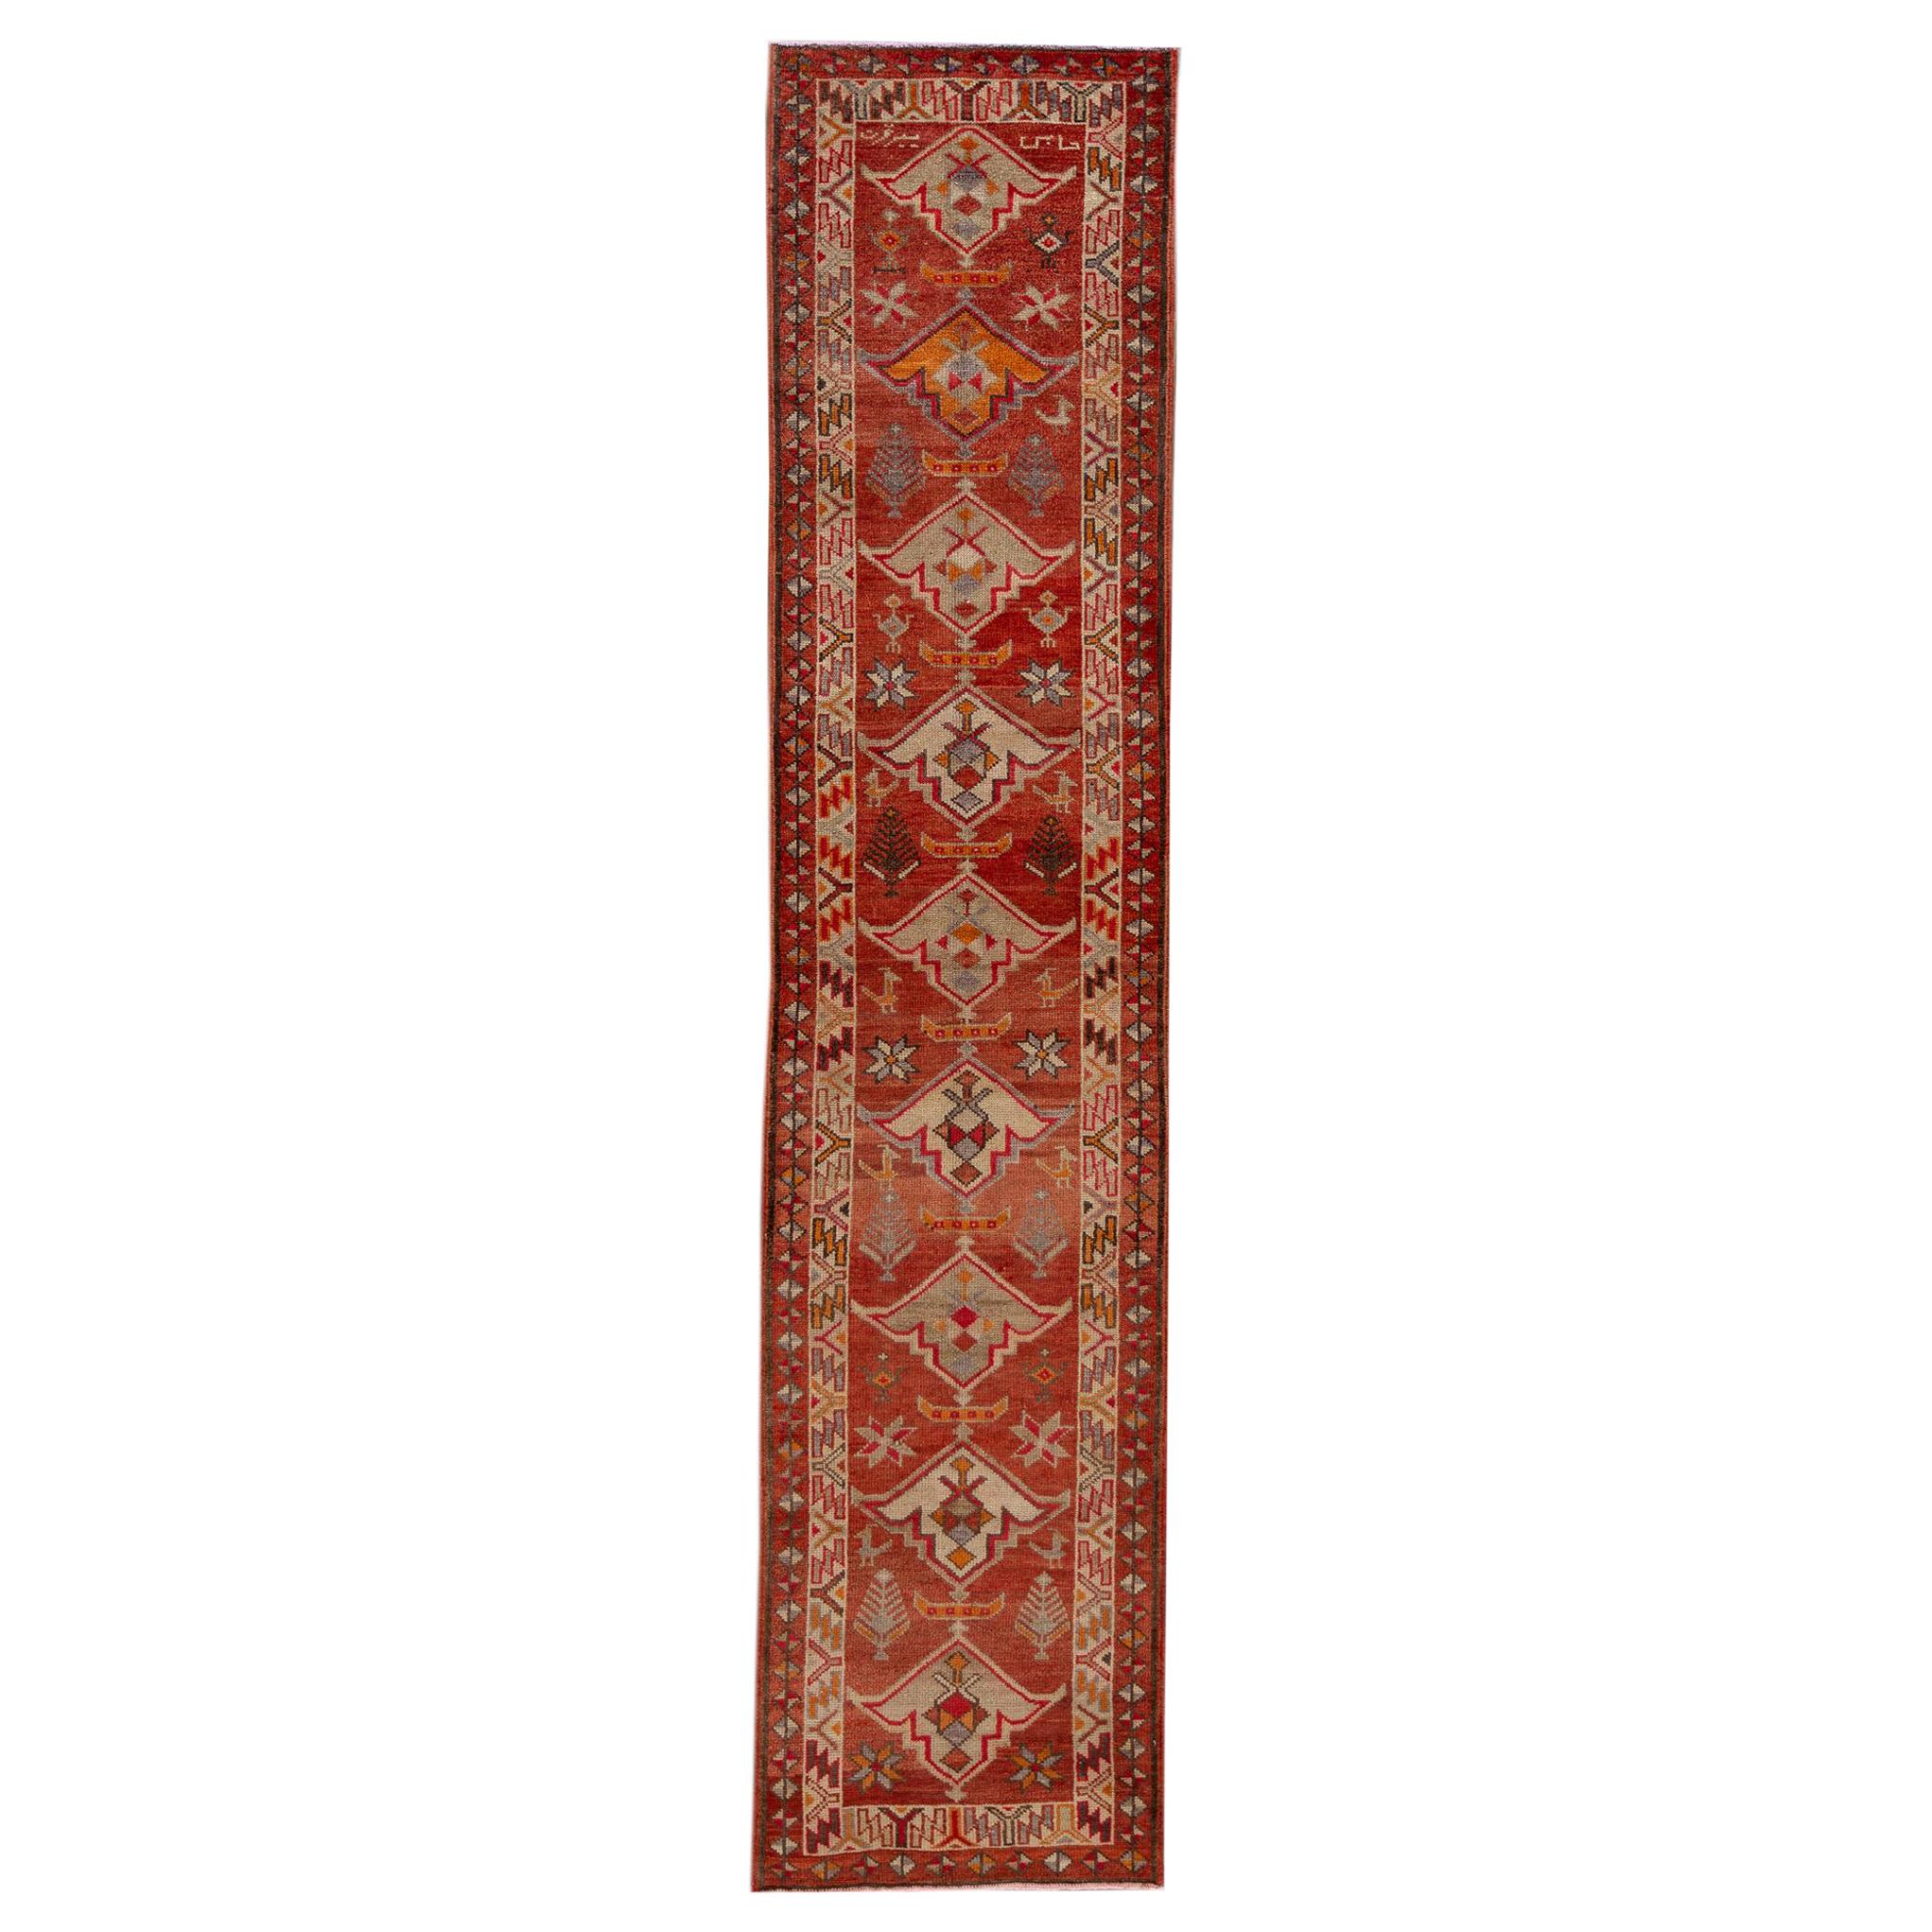 Early 20th Century Anatolian Village Runner Rug For Sale